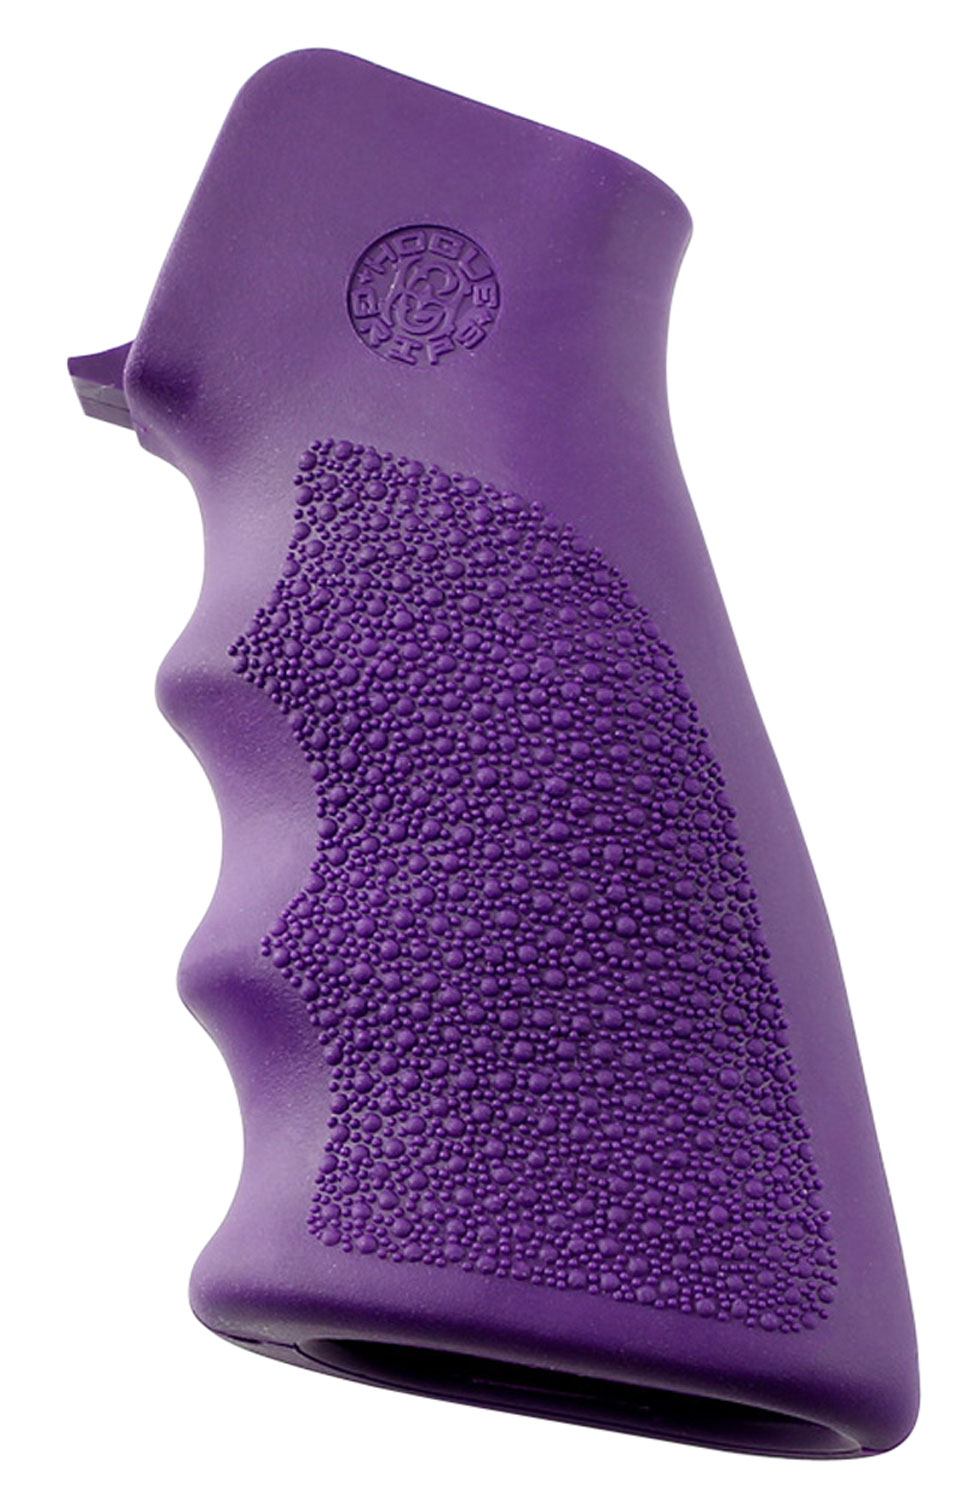 Hogue 15006 OverMolded Grip Cobblestone Purple Rubber with Finger Grooves for AR-15, M16